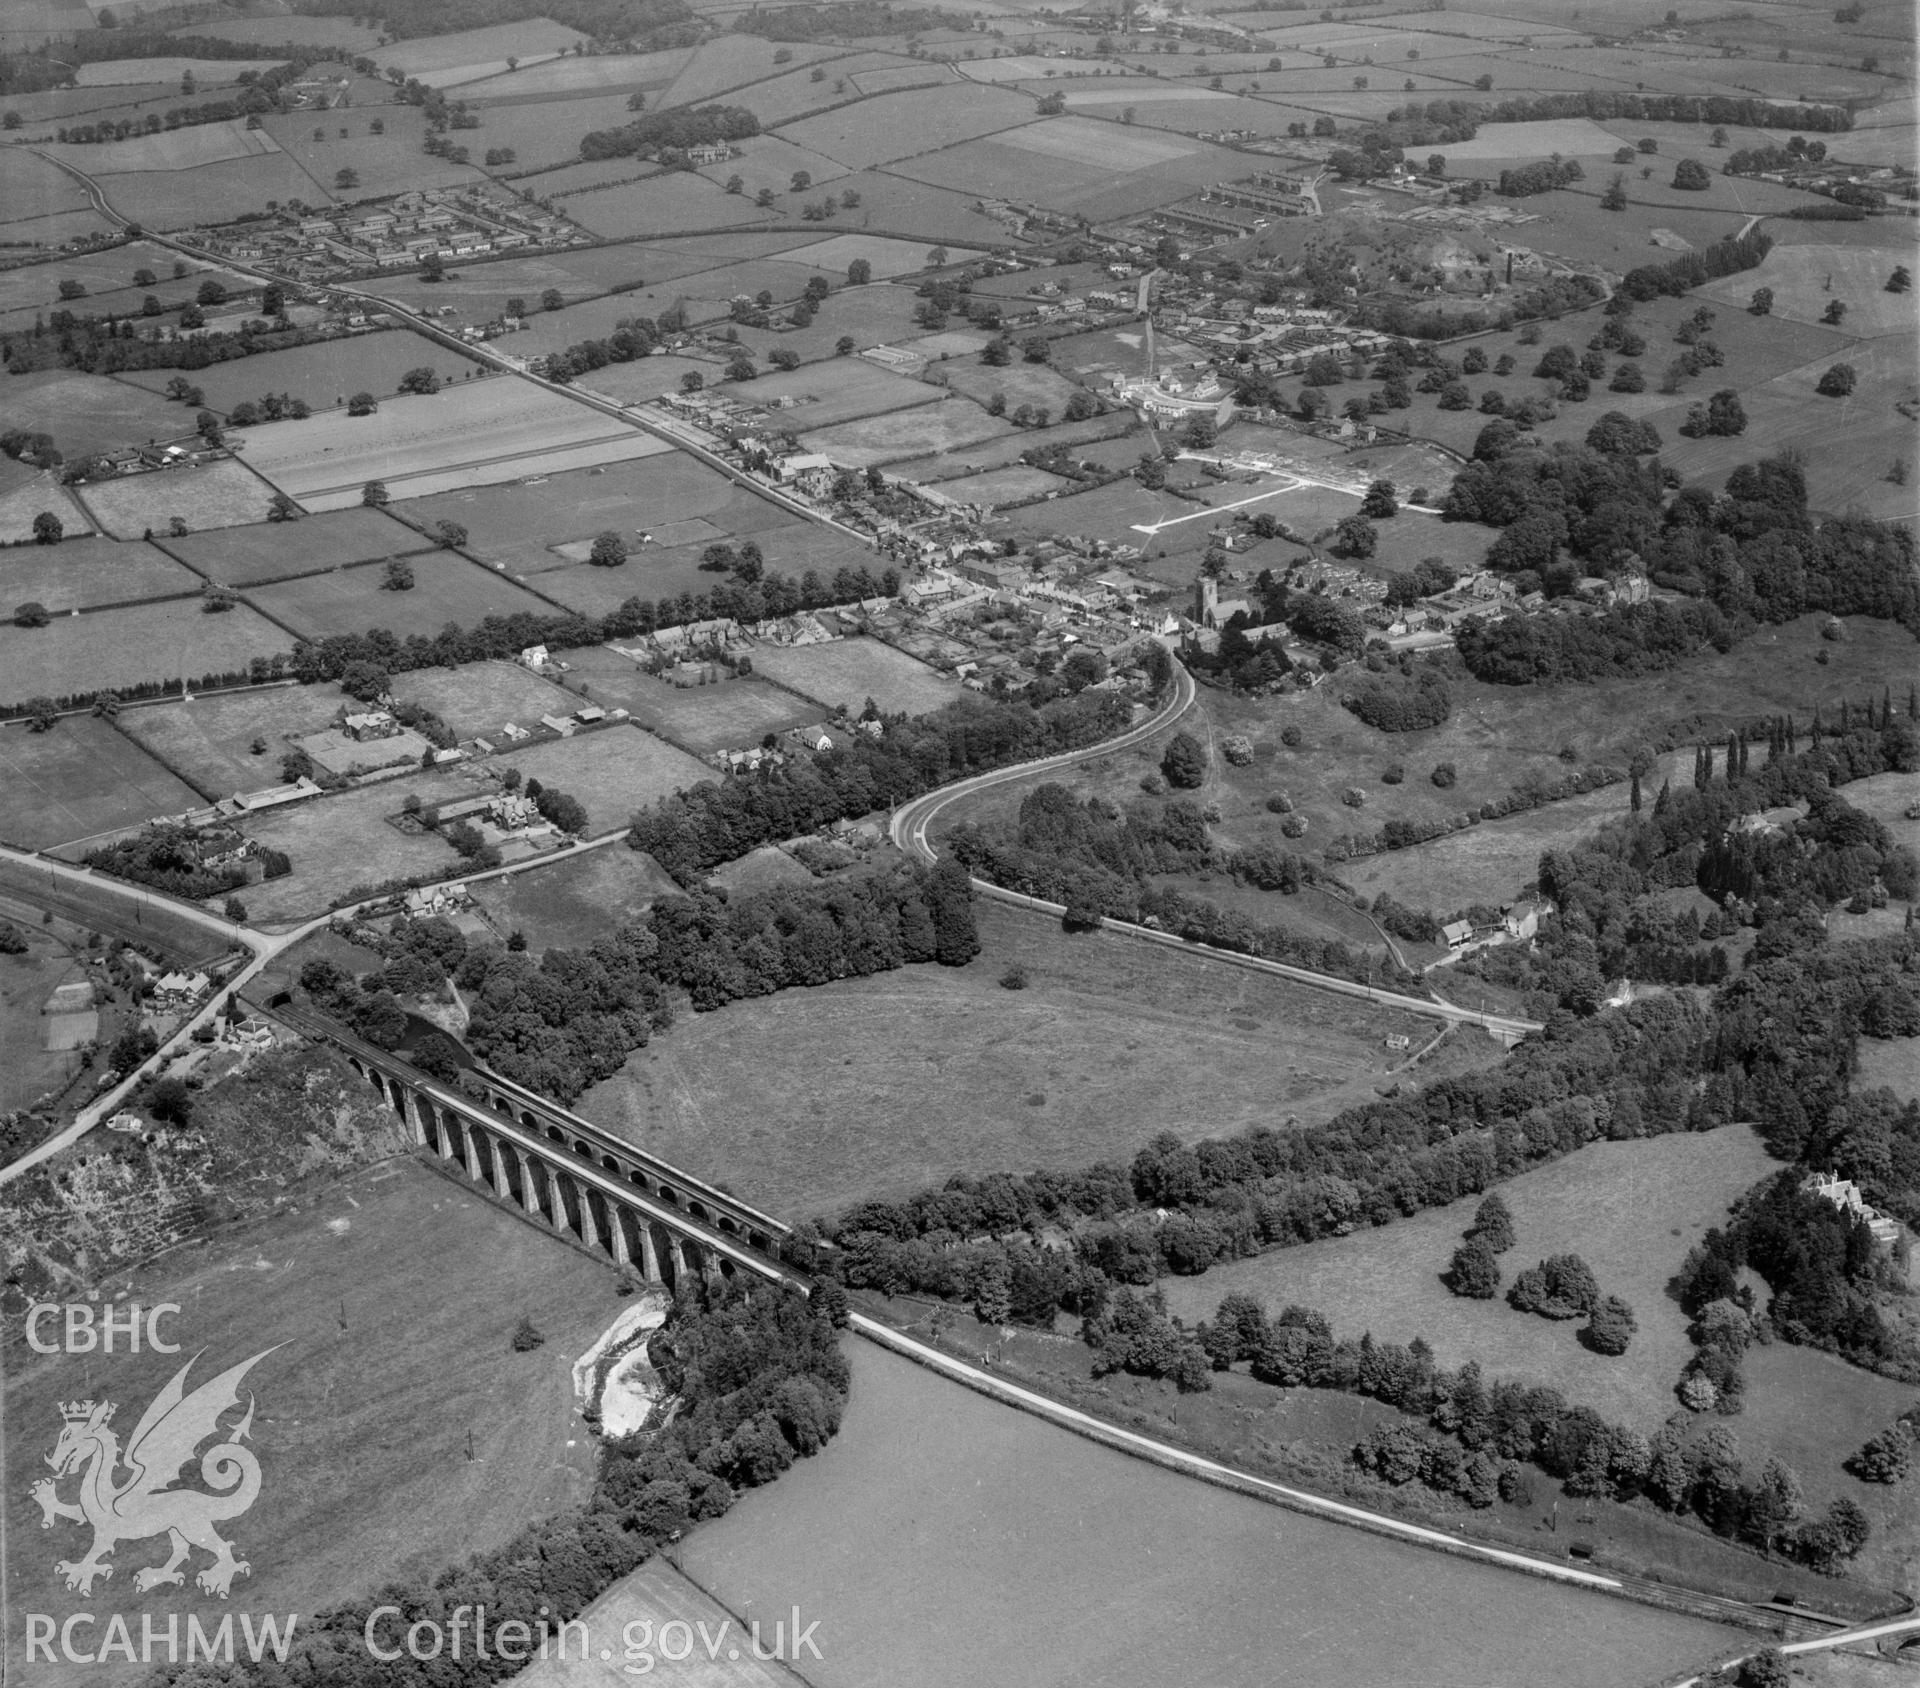 View of Chirk showing viaduct